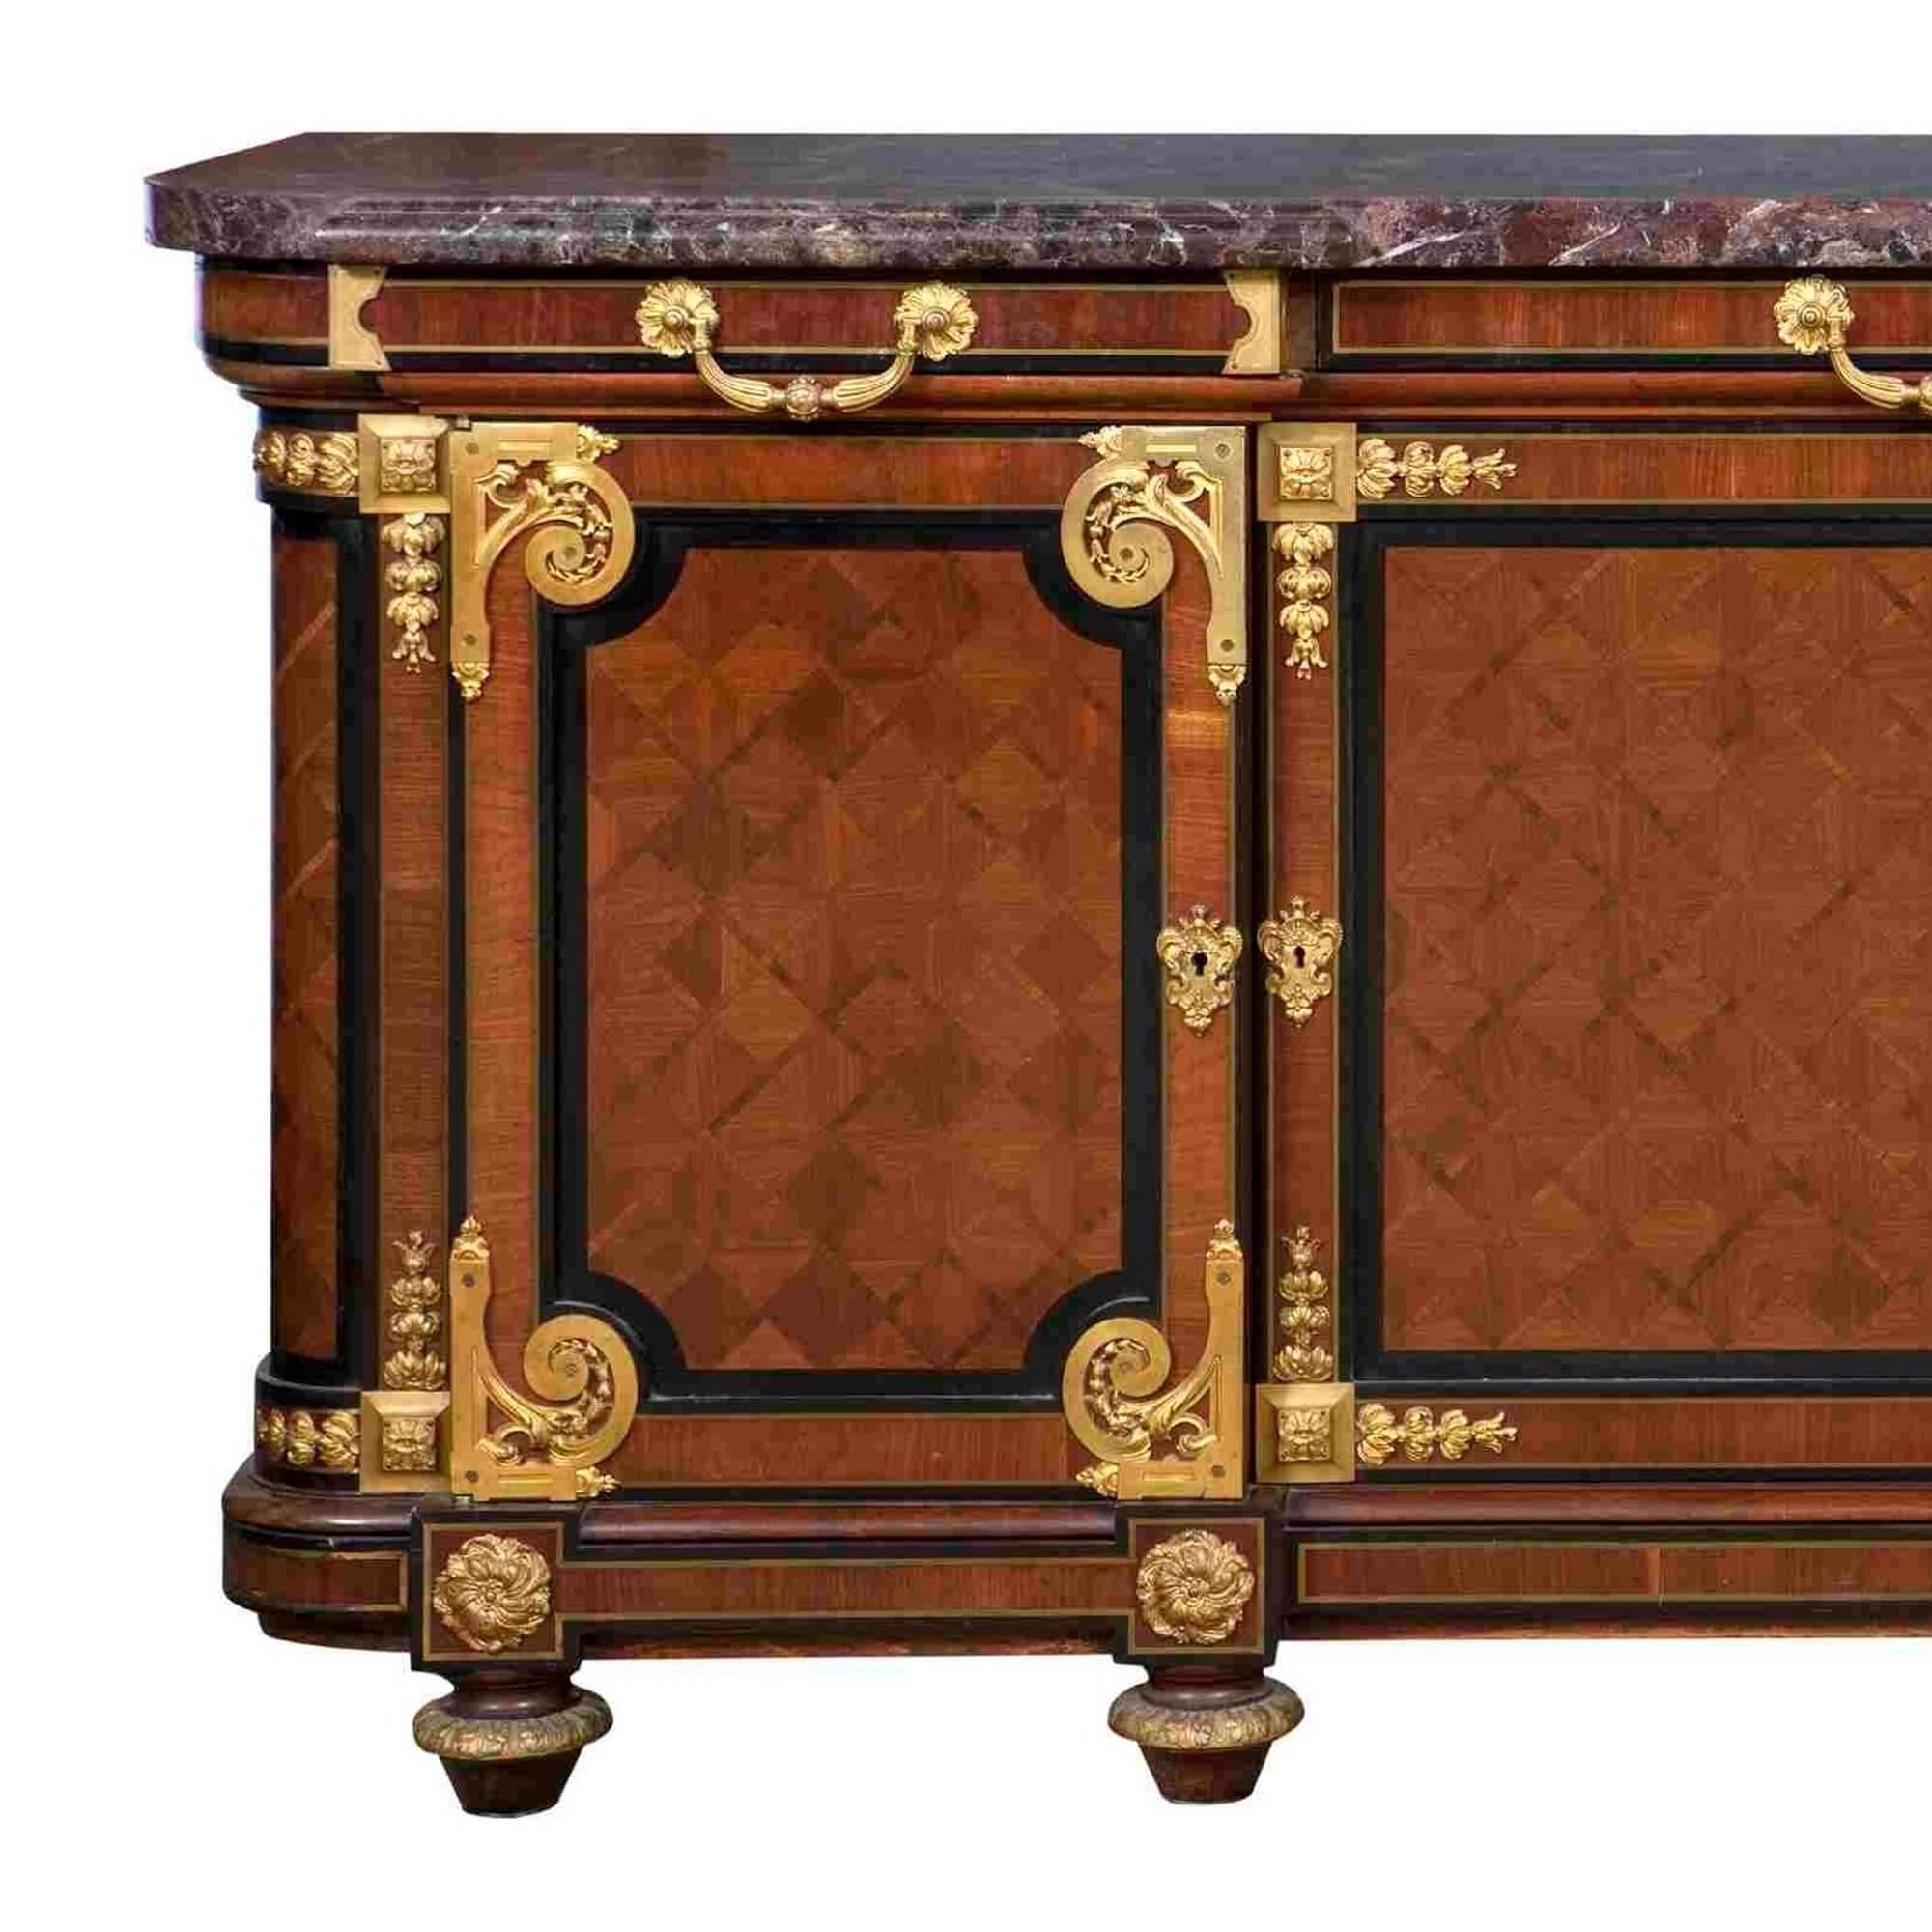 Antique Louis XVI style mahogany, Ormolu and marble cabinet by Mercier Frères,
French, 19th century
Height 98cm, width 223cm, depth 55cm

Standing on toupie feet, this cabinet is crafted from mahogany and is richly decorated with gilt bronze